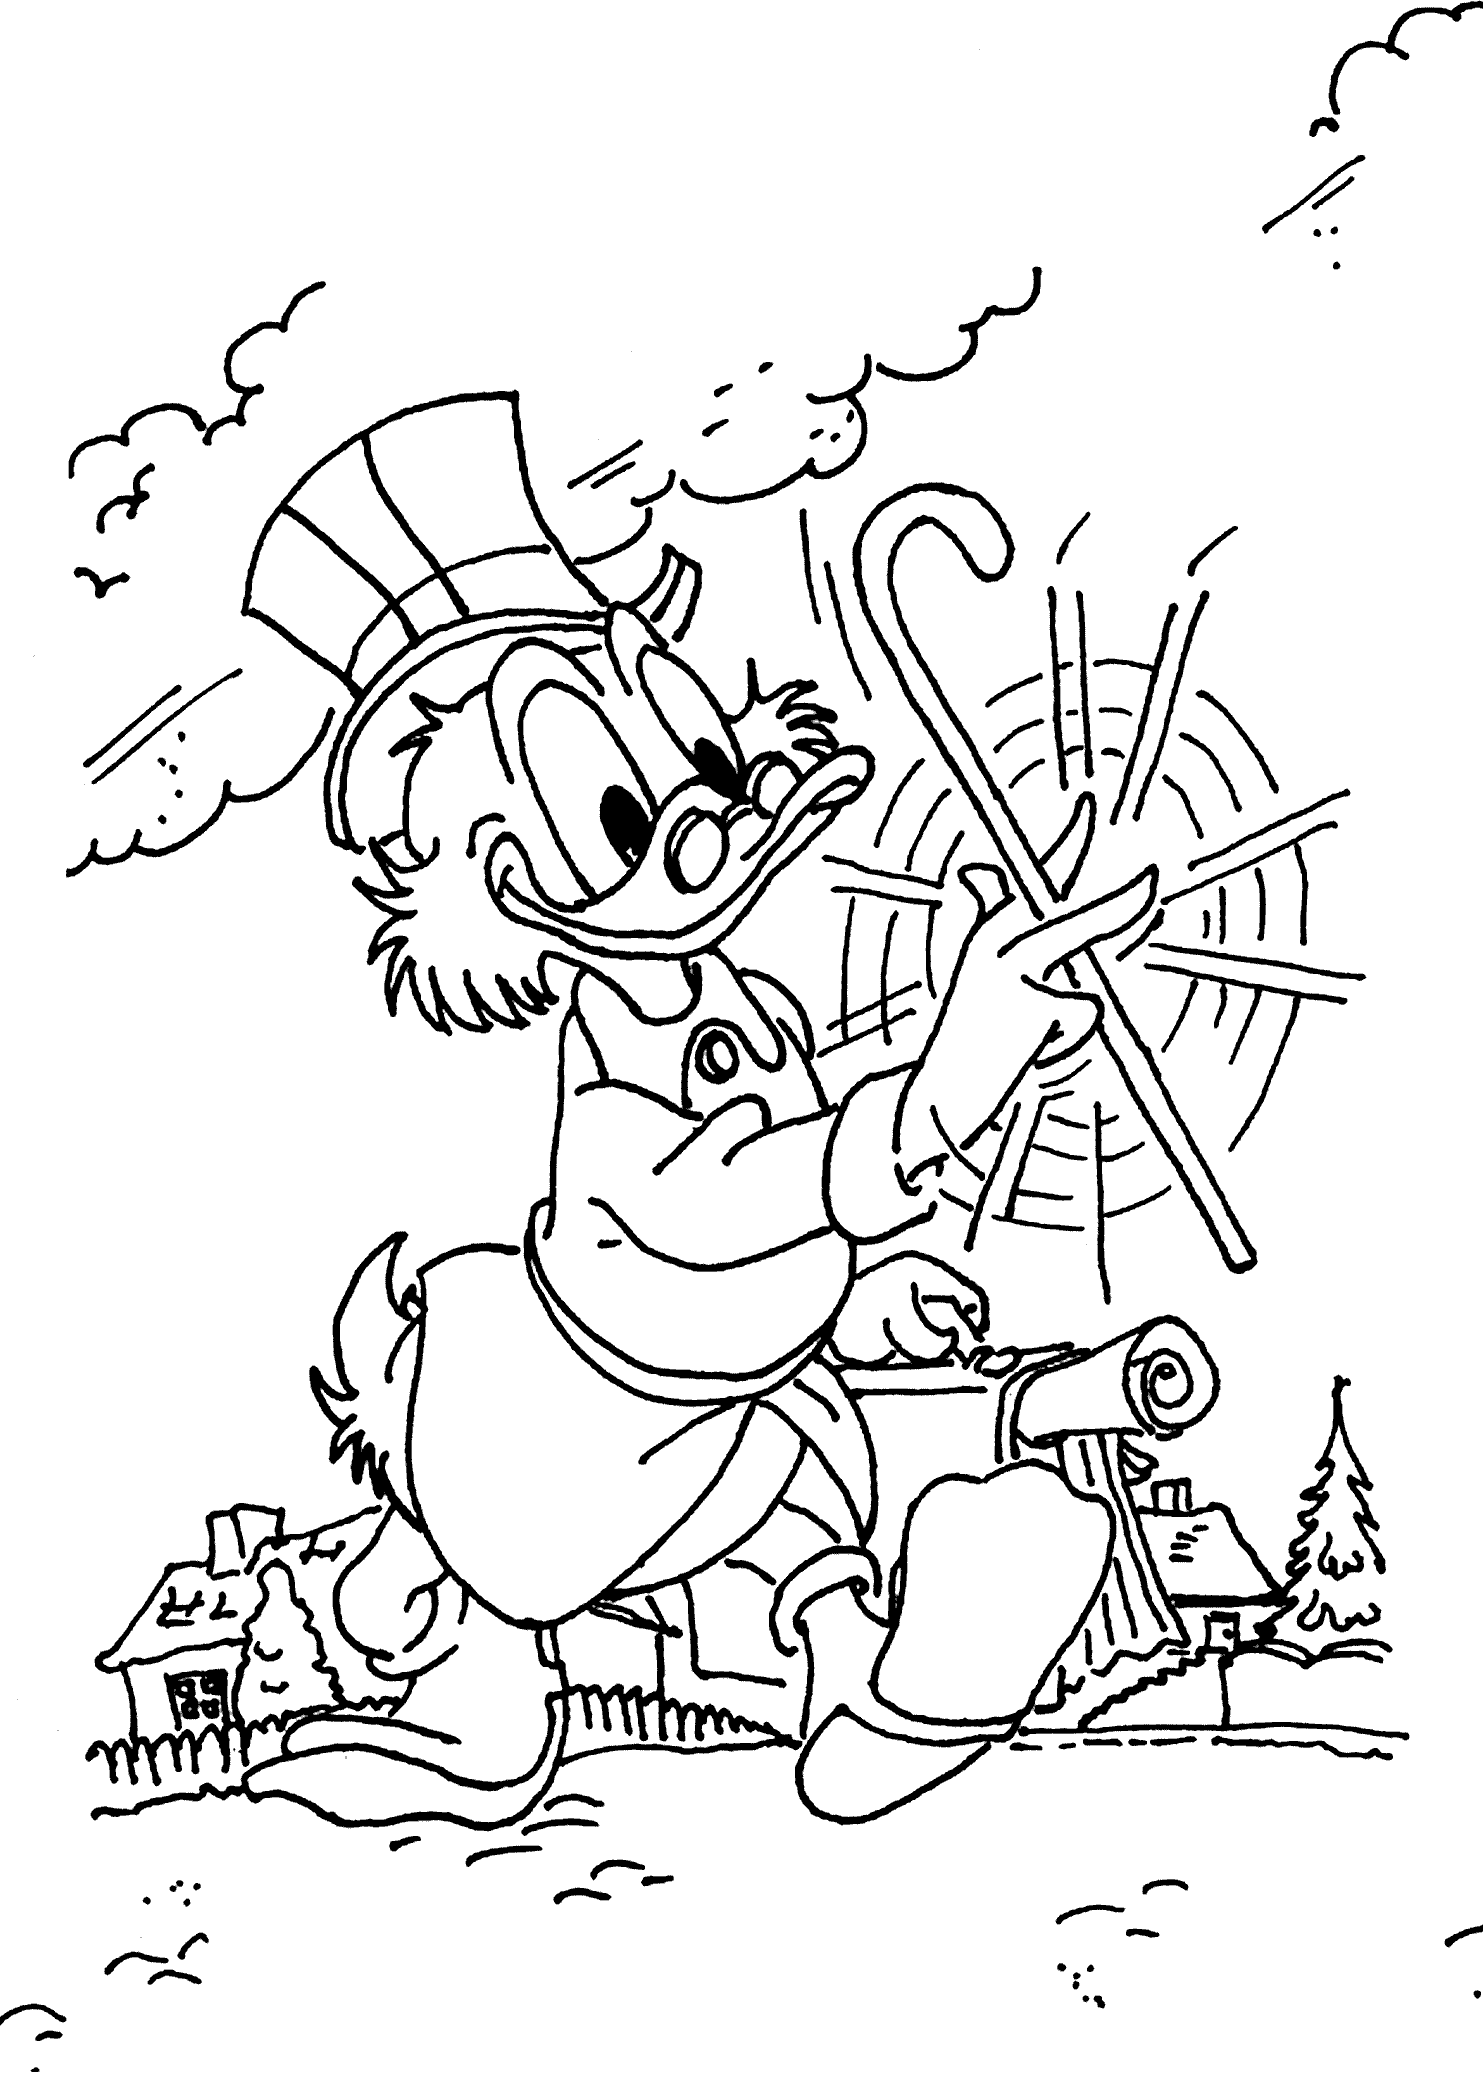 Scrooge coloring pages for kids printable free cartoon coloring pages kitty coloring coloring pages